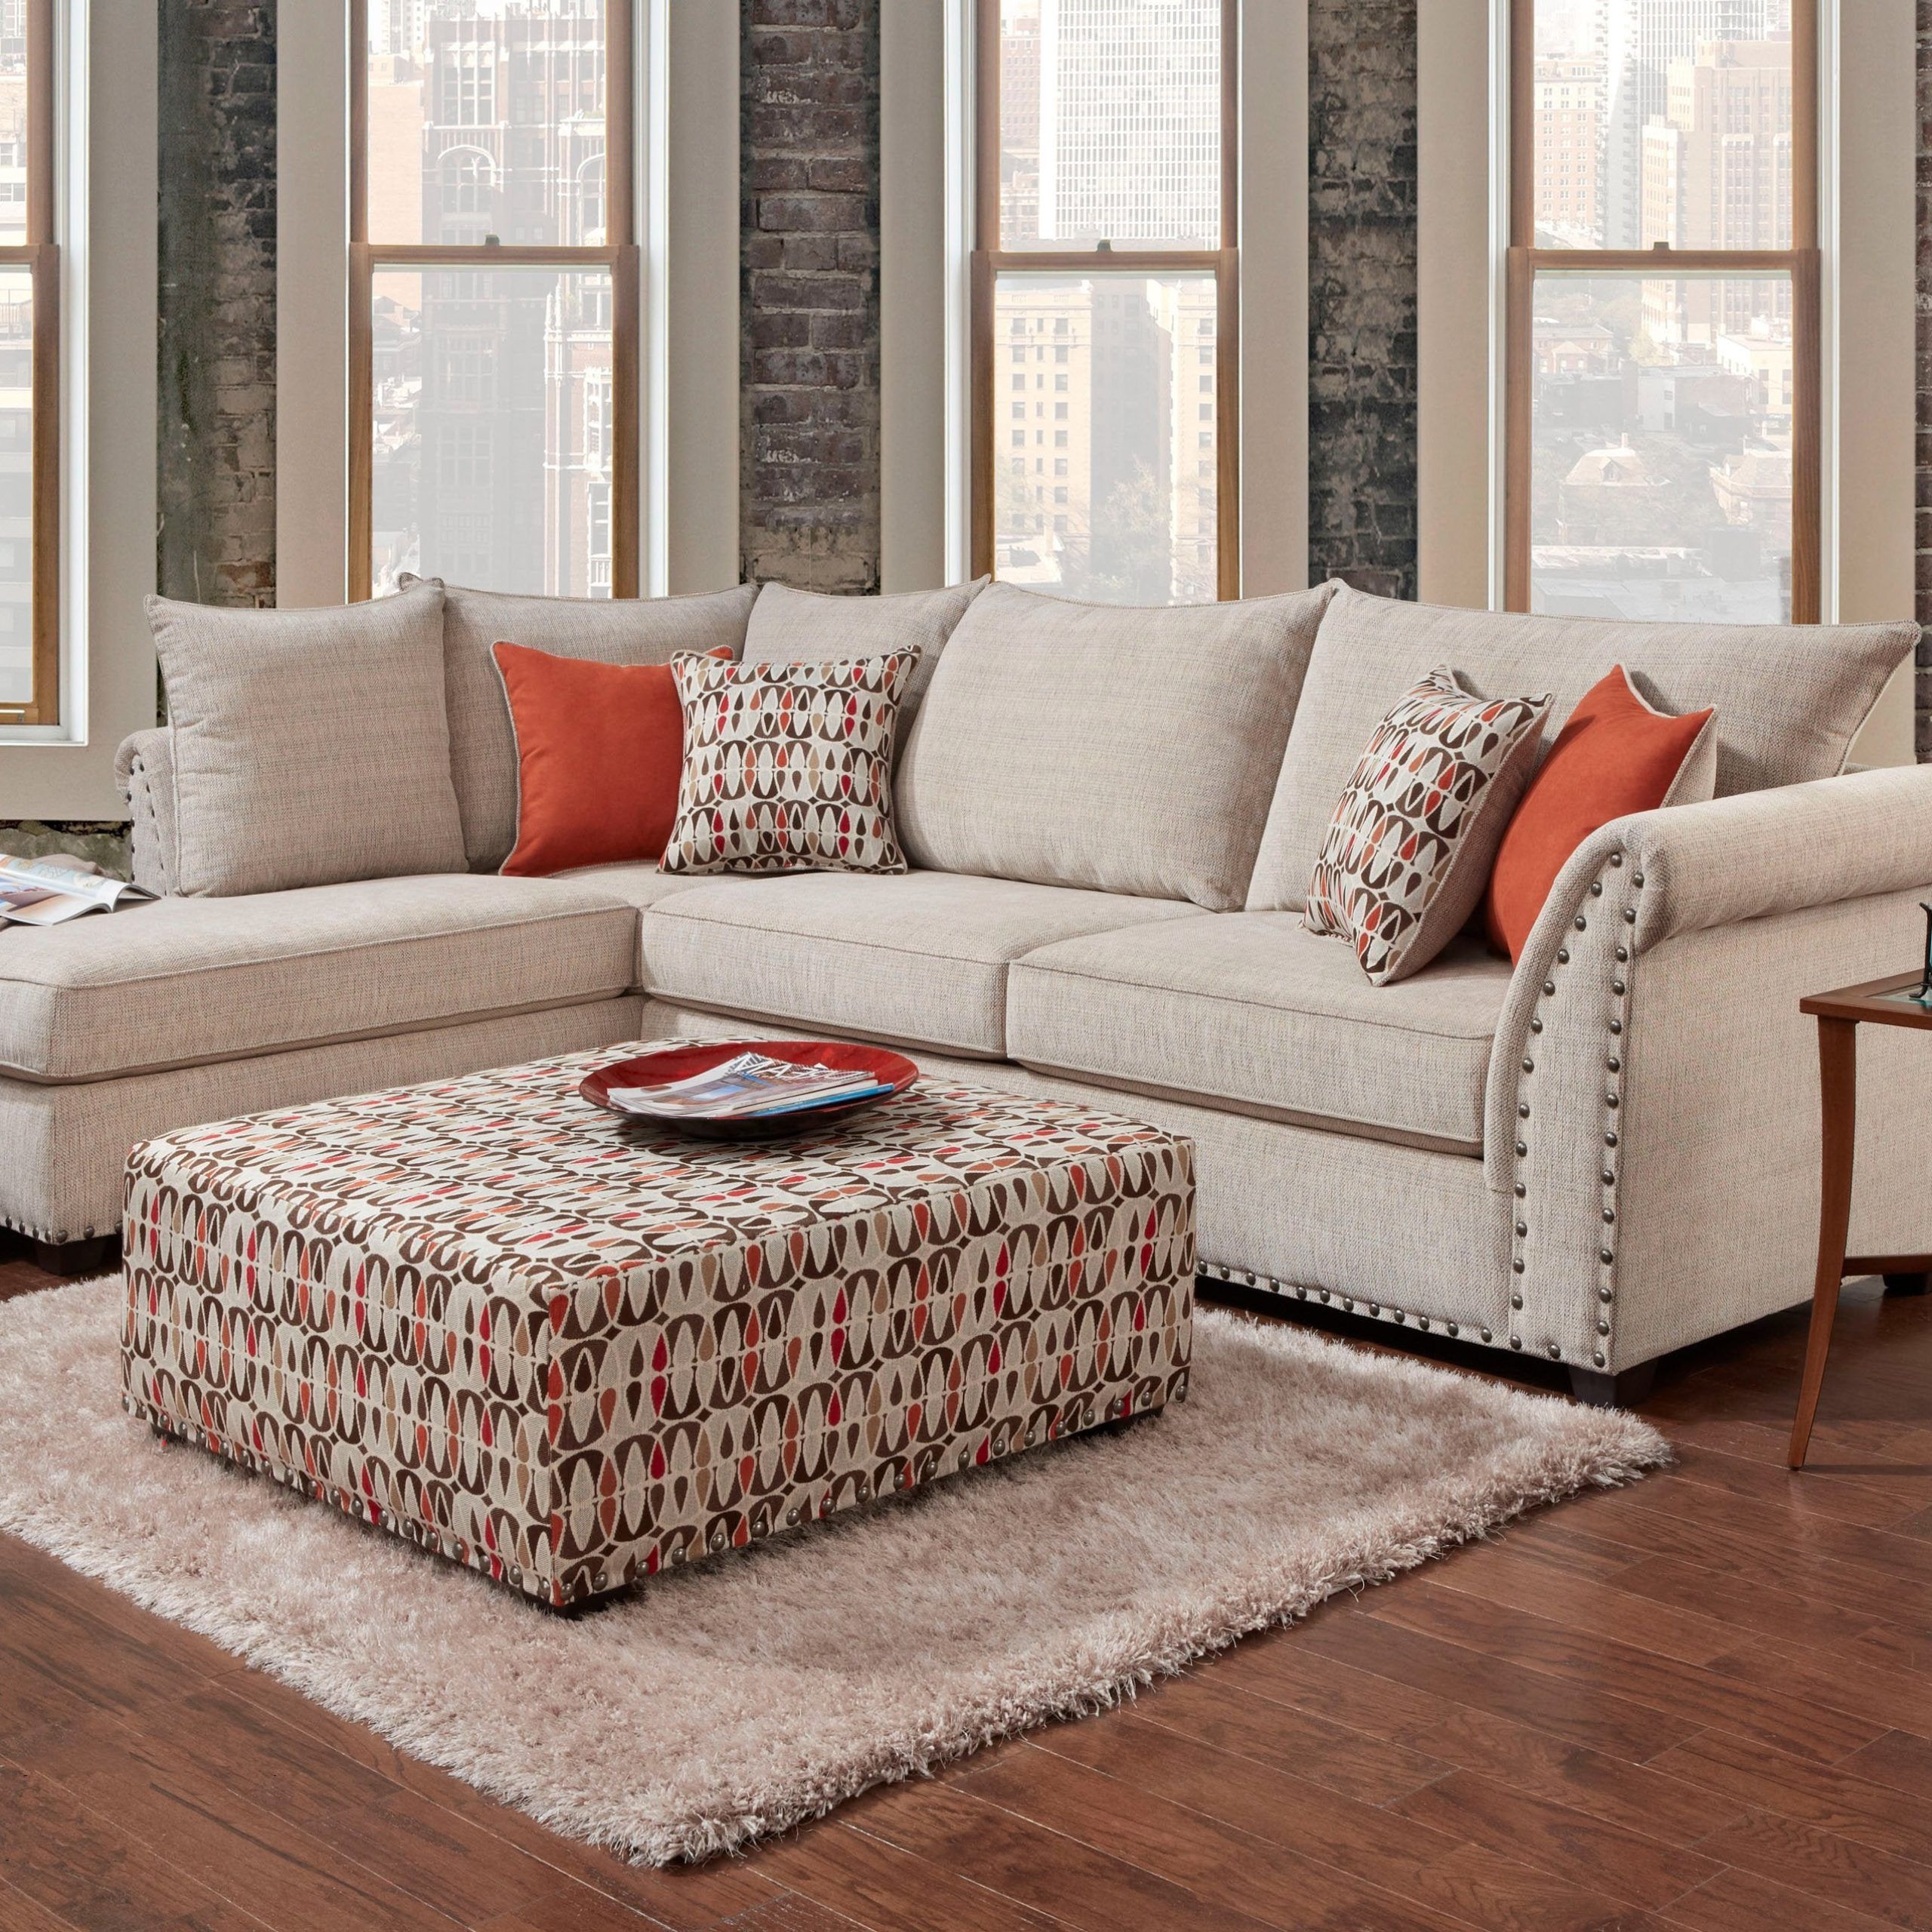 Sofas In Beige In Preferred Patton Beige Sectional Sofa Set – Afurniturecompany (View 14 of 15)